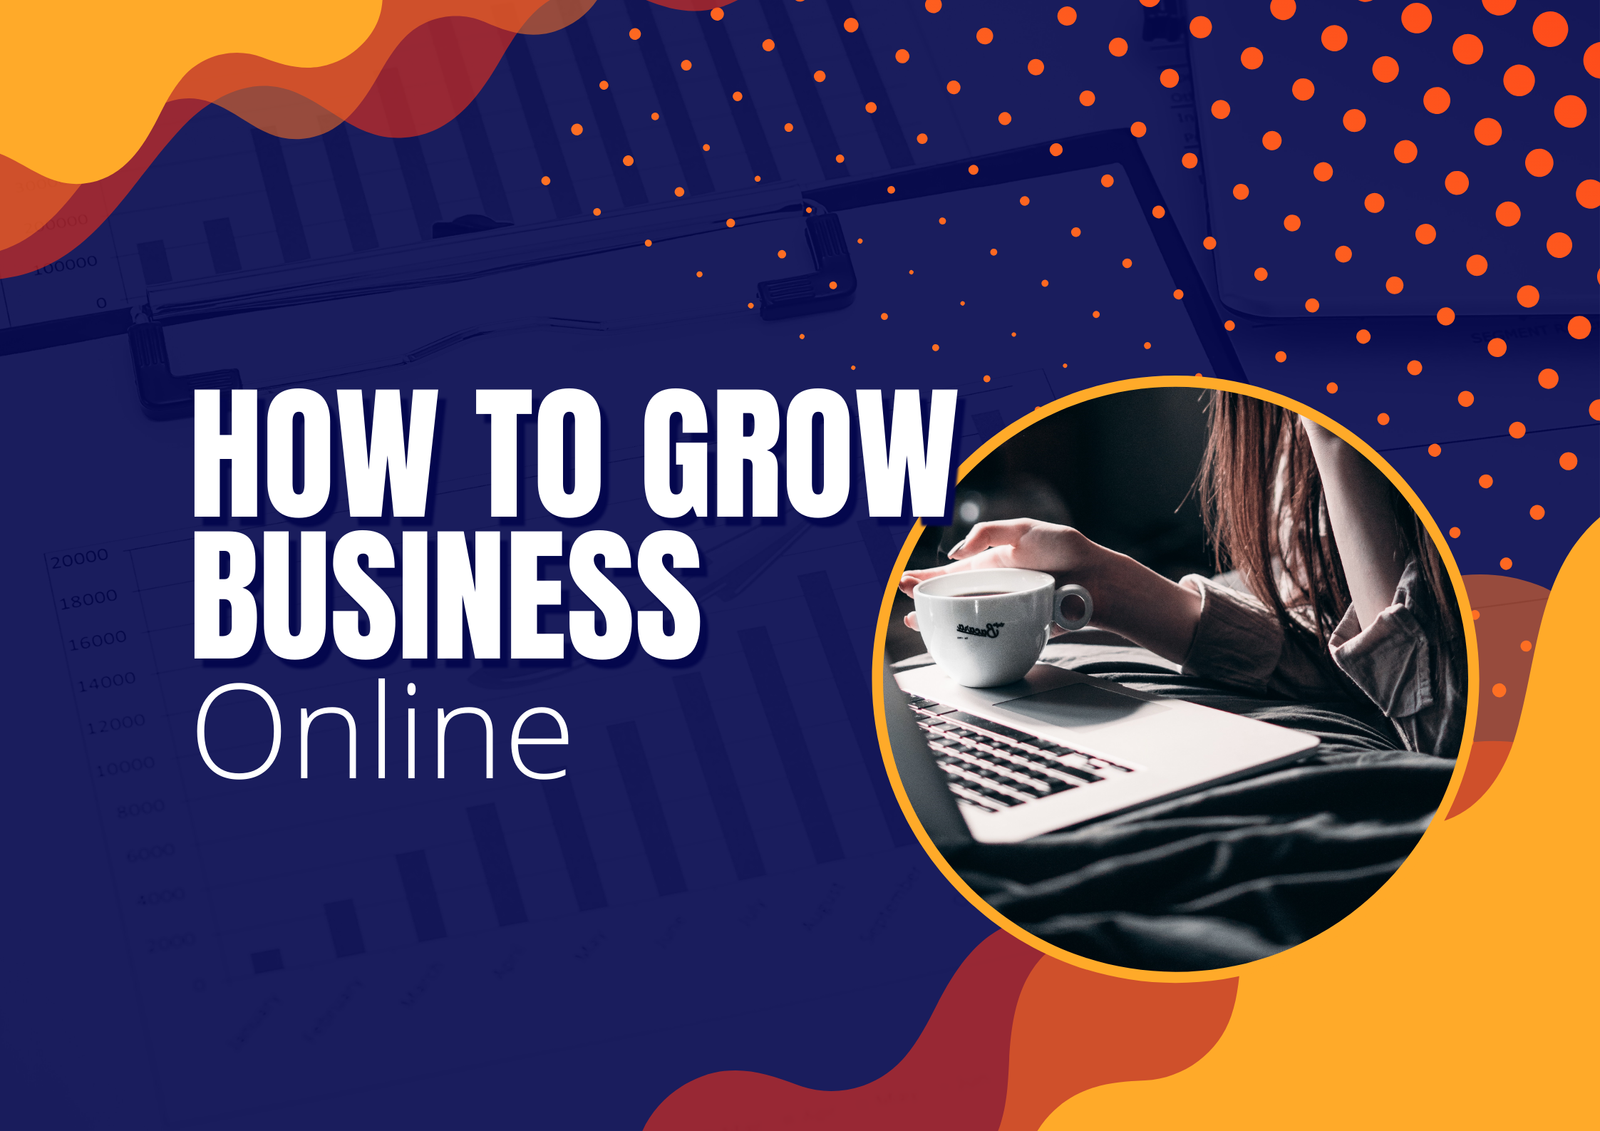 How to Grow Business Online